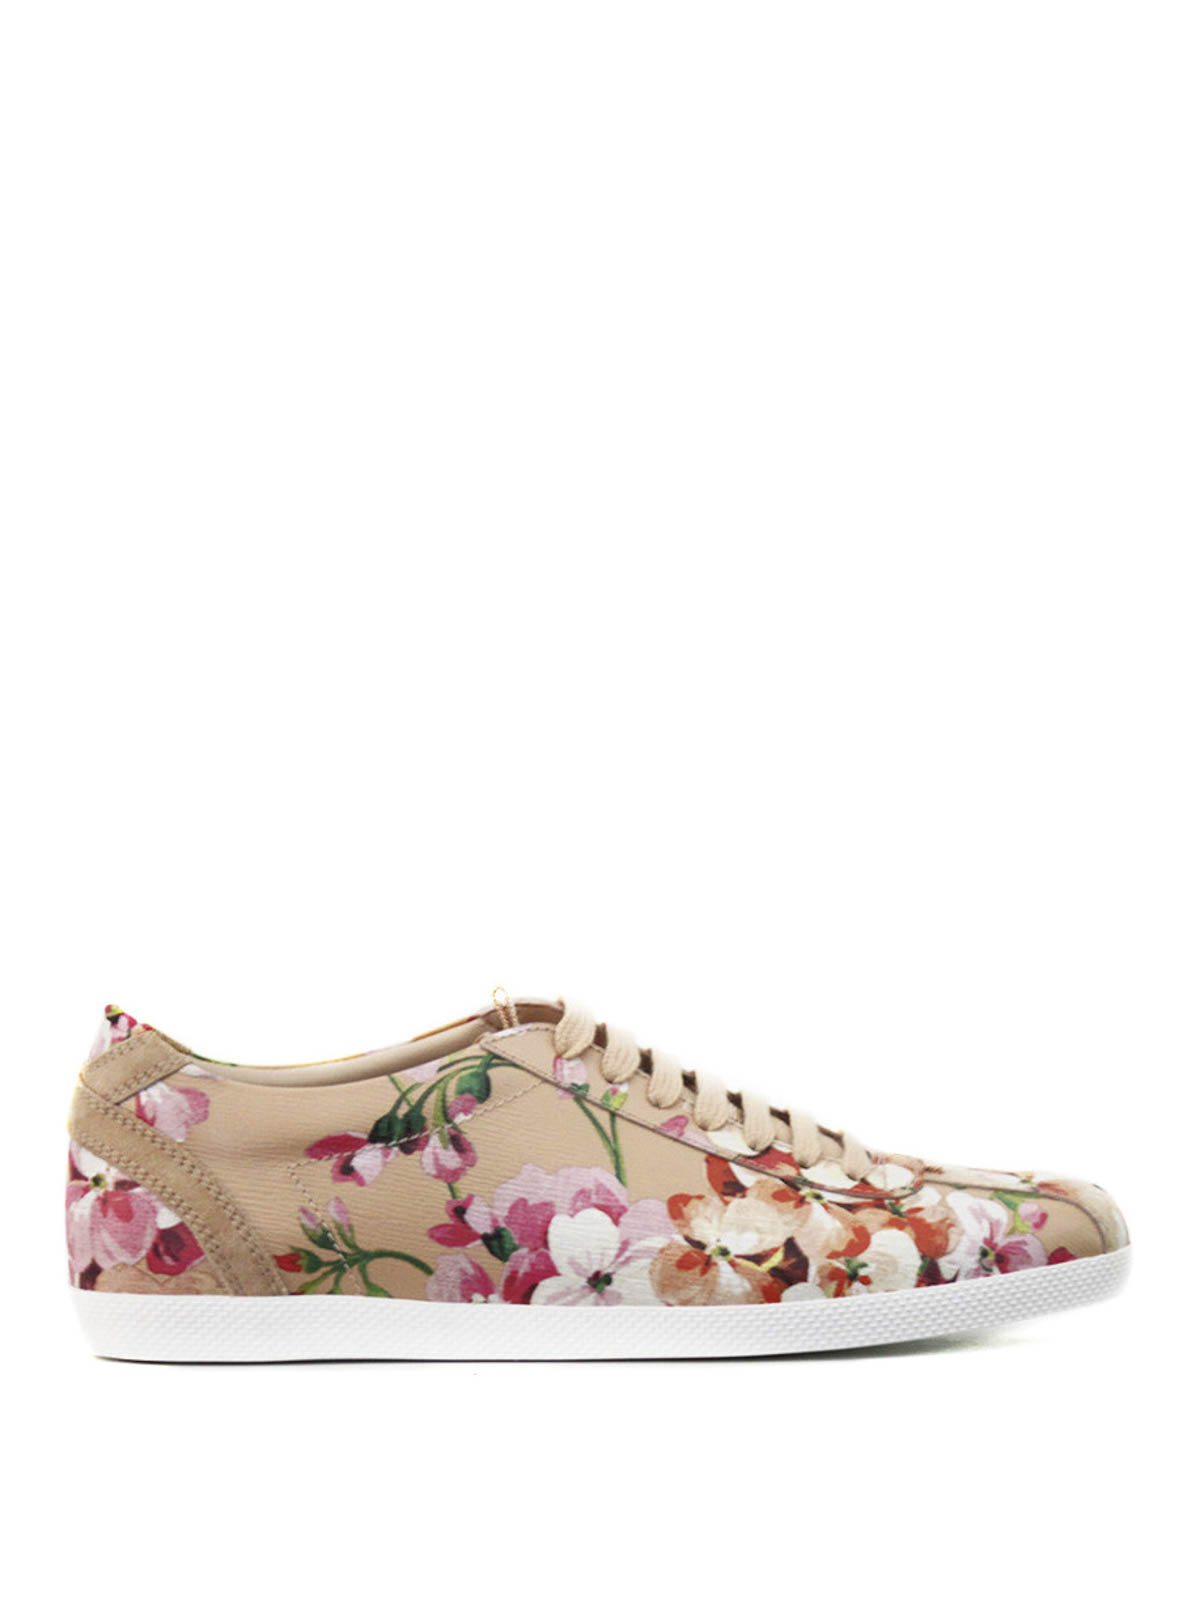 Trainers Gucci - Blooms print GG Supreme sneakers - 408527DJH505780